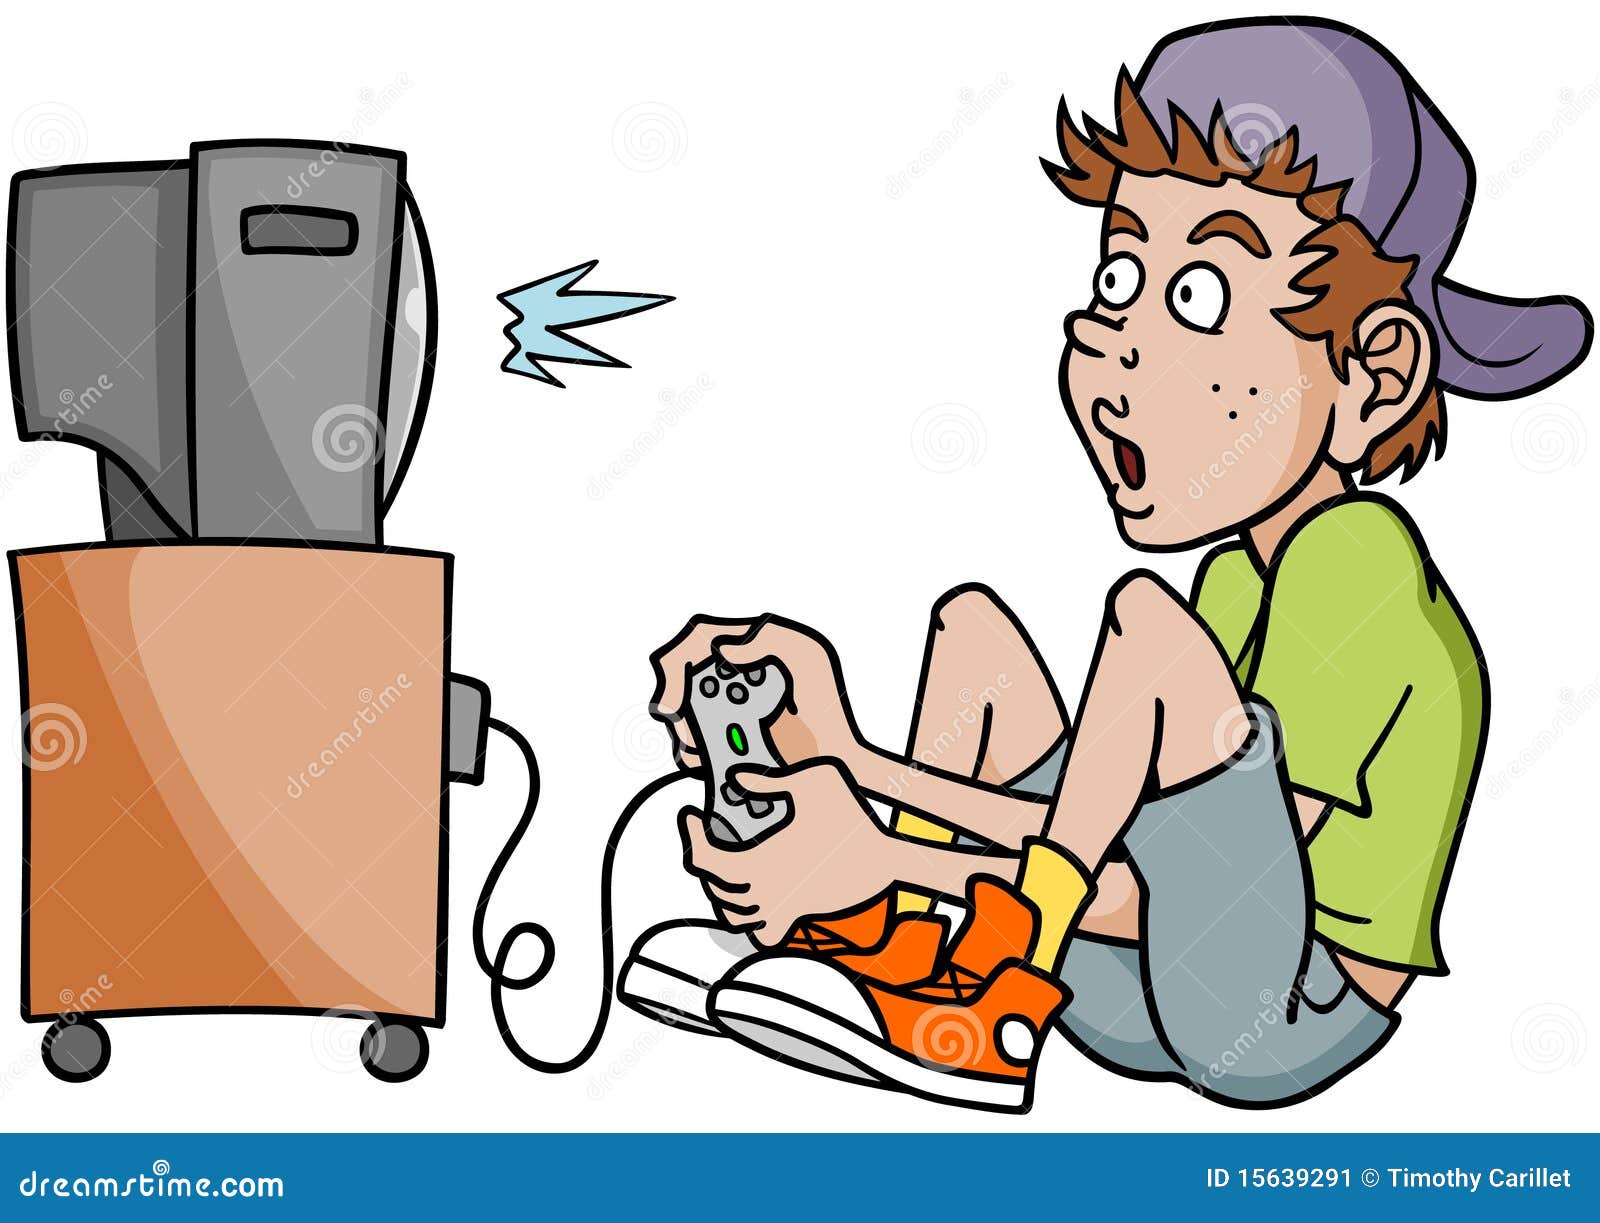 girl playing video games clipart - photo #14